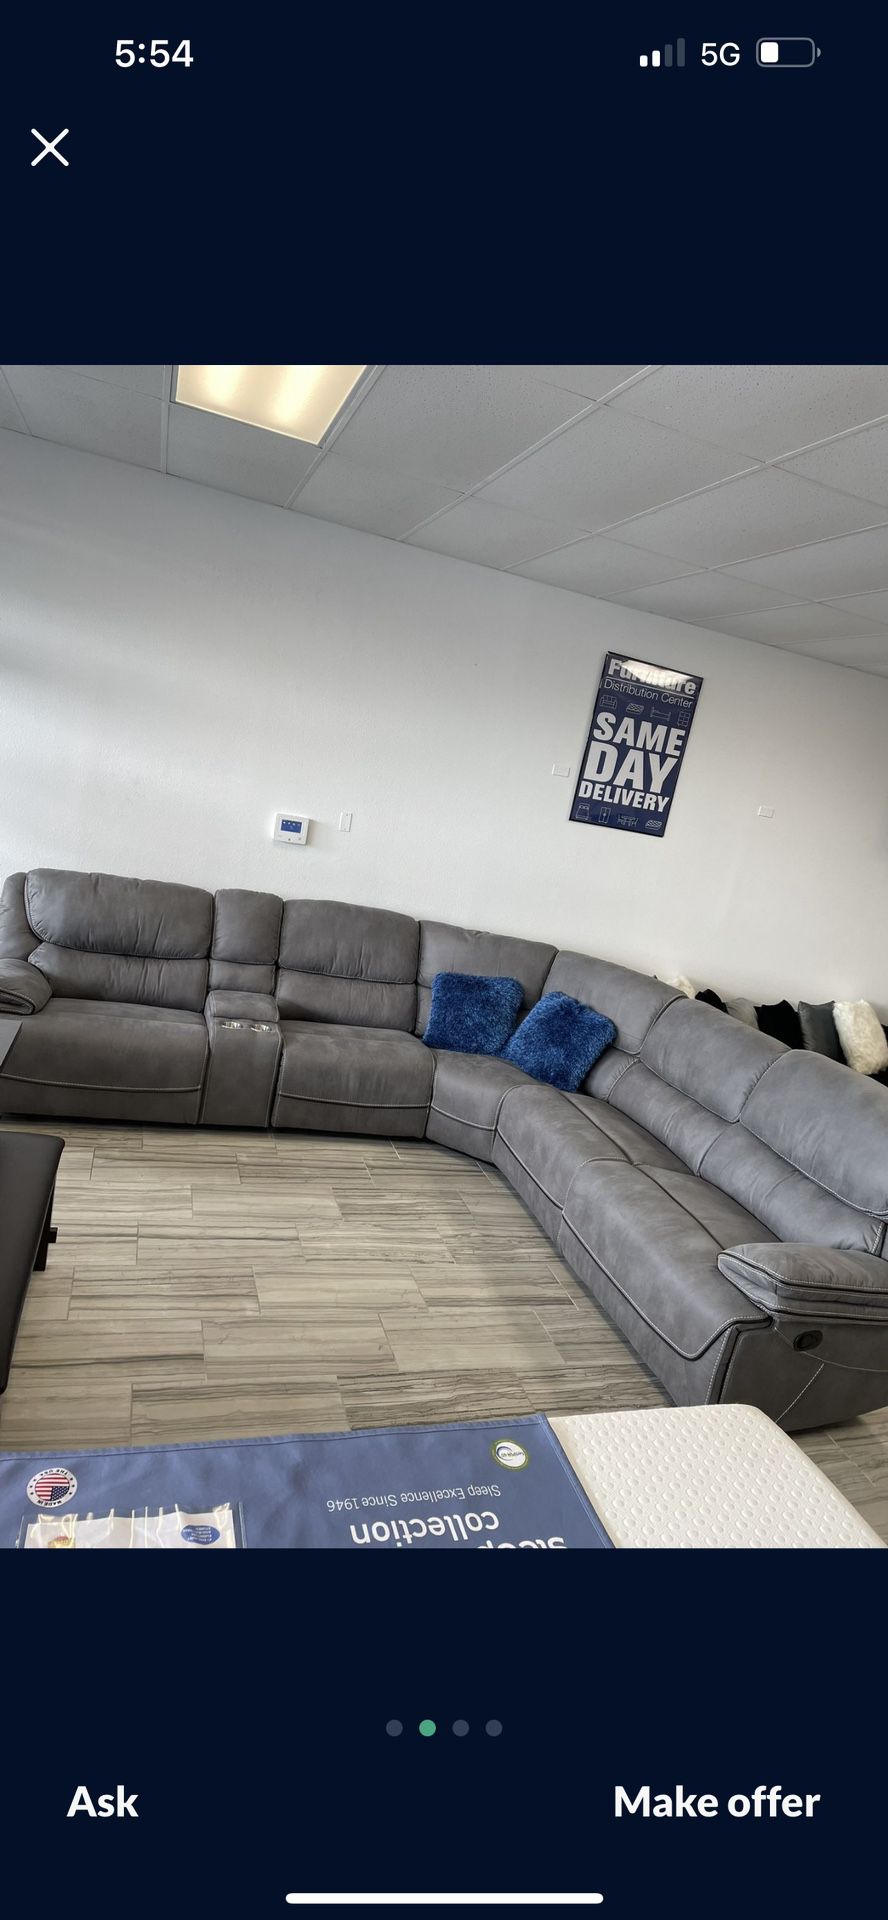 GORGEOUS GRAY ALEJANDRA SECTIONAL SOFA!$1199!*SAME DAY DELIVERY*NO CREDIT NEEDED*EASY FINANCING*HUGE SALE*